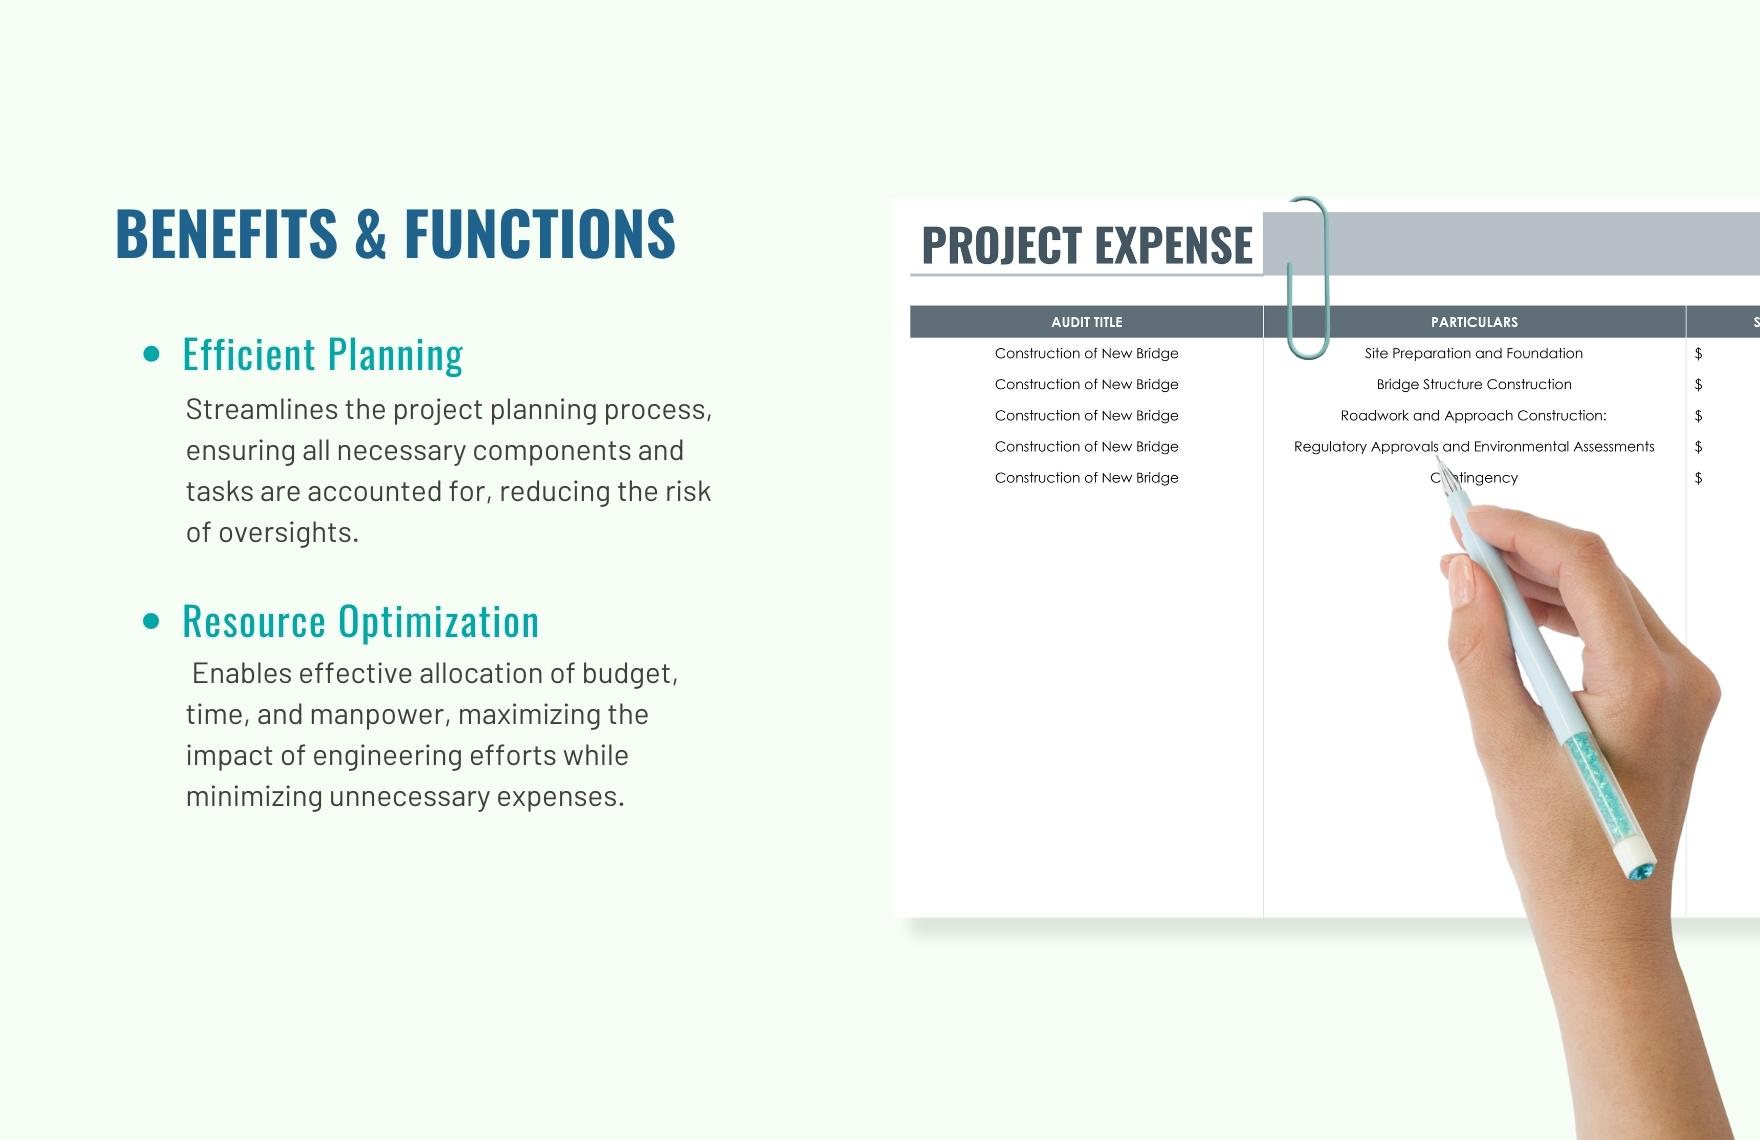 Engineering Project Plan Template